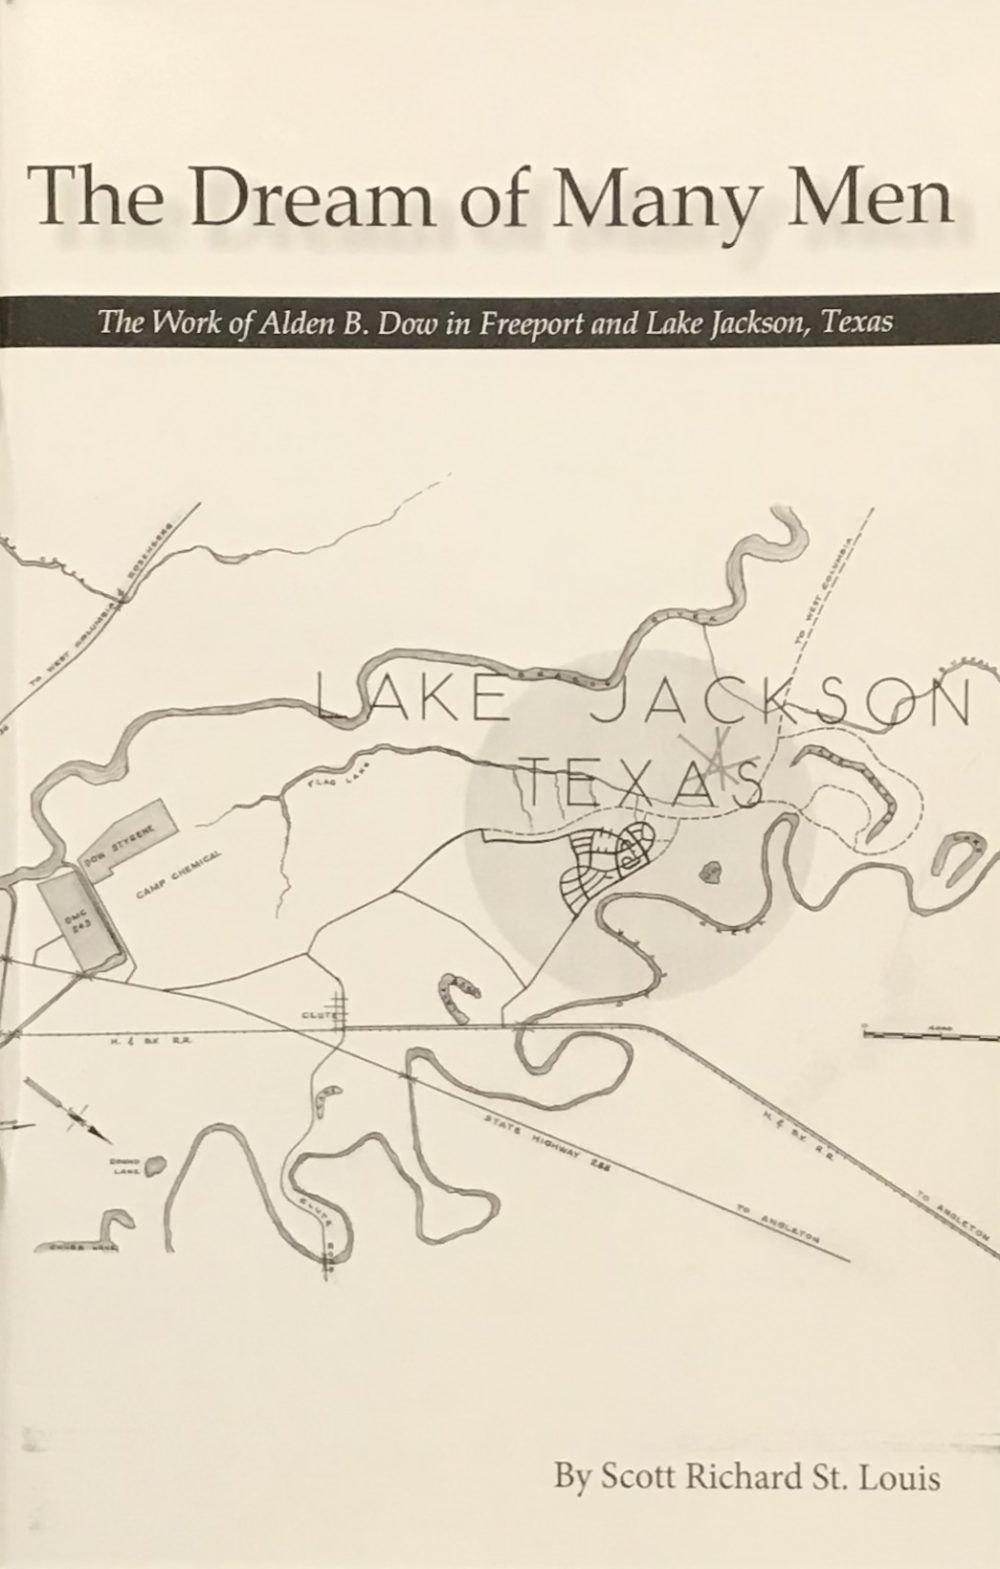 The Dream of Many Men, The Work of Alden B. Dow in Freeport and Lake Jackson